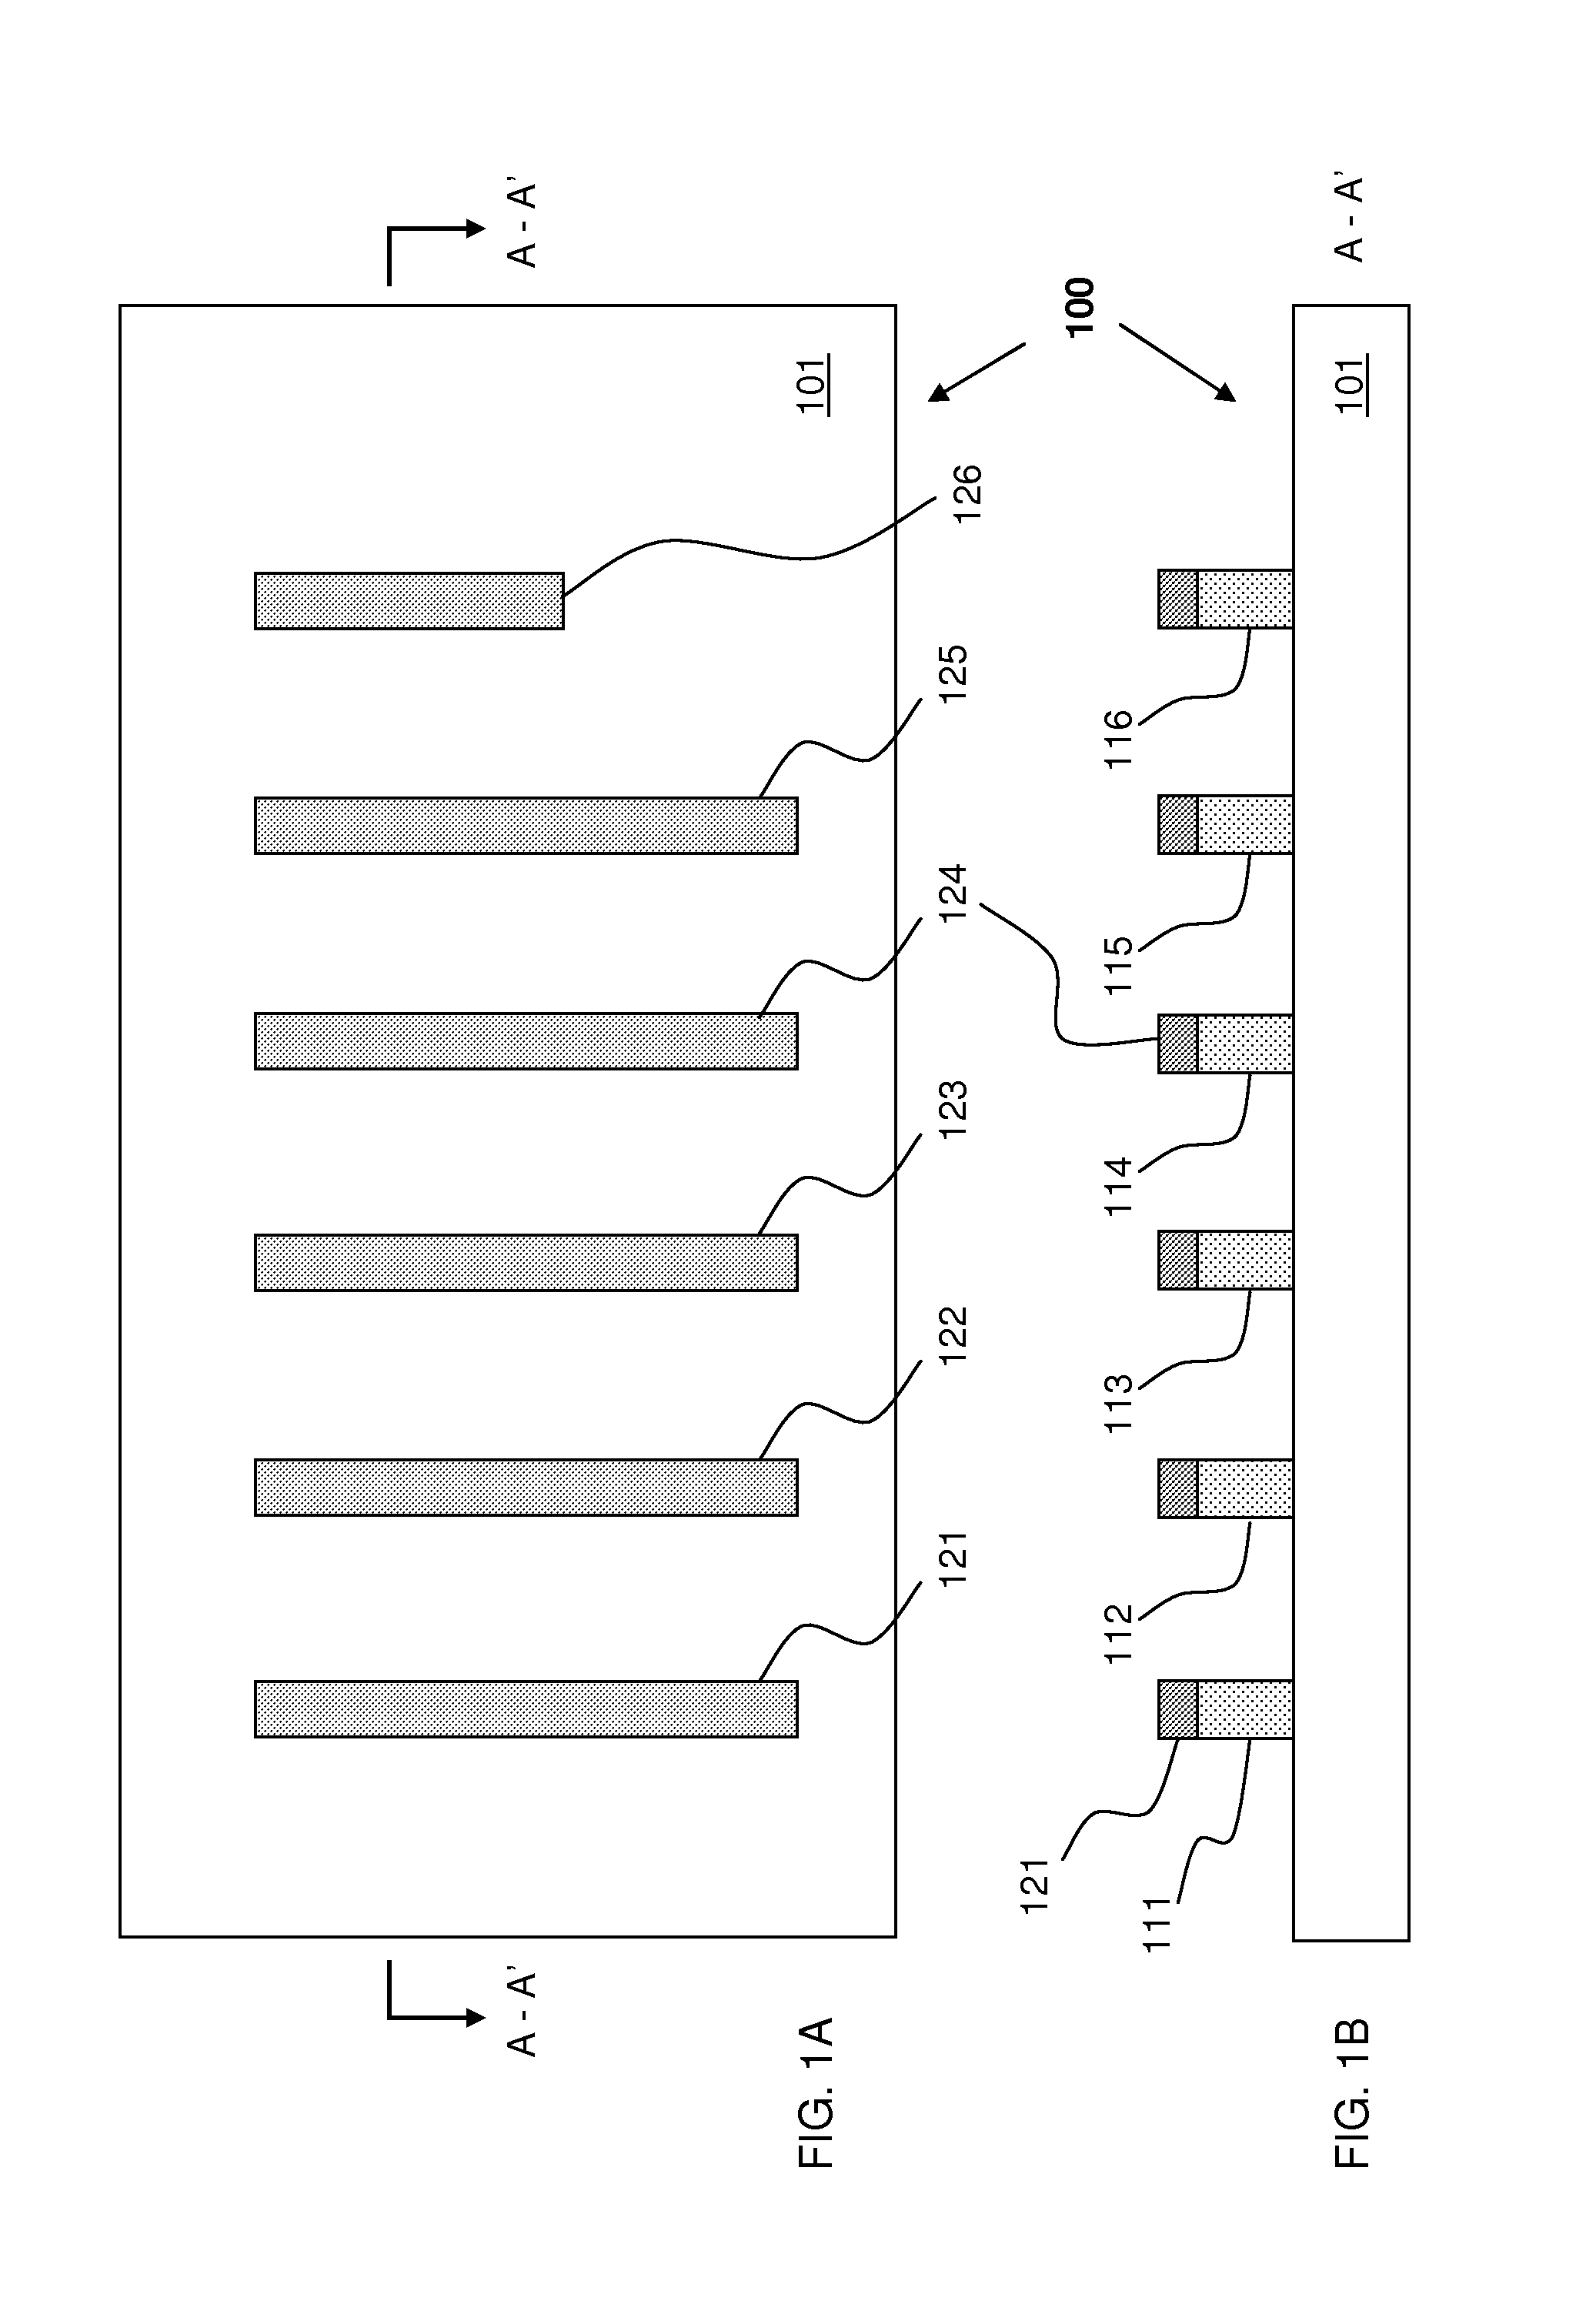 Self-aligned dielectric isolation for finfet devices